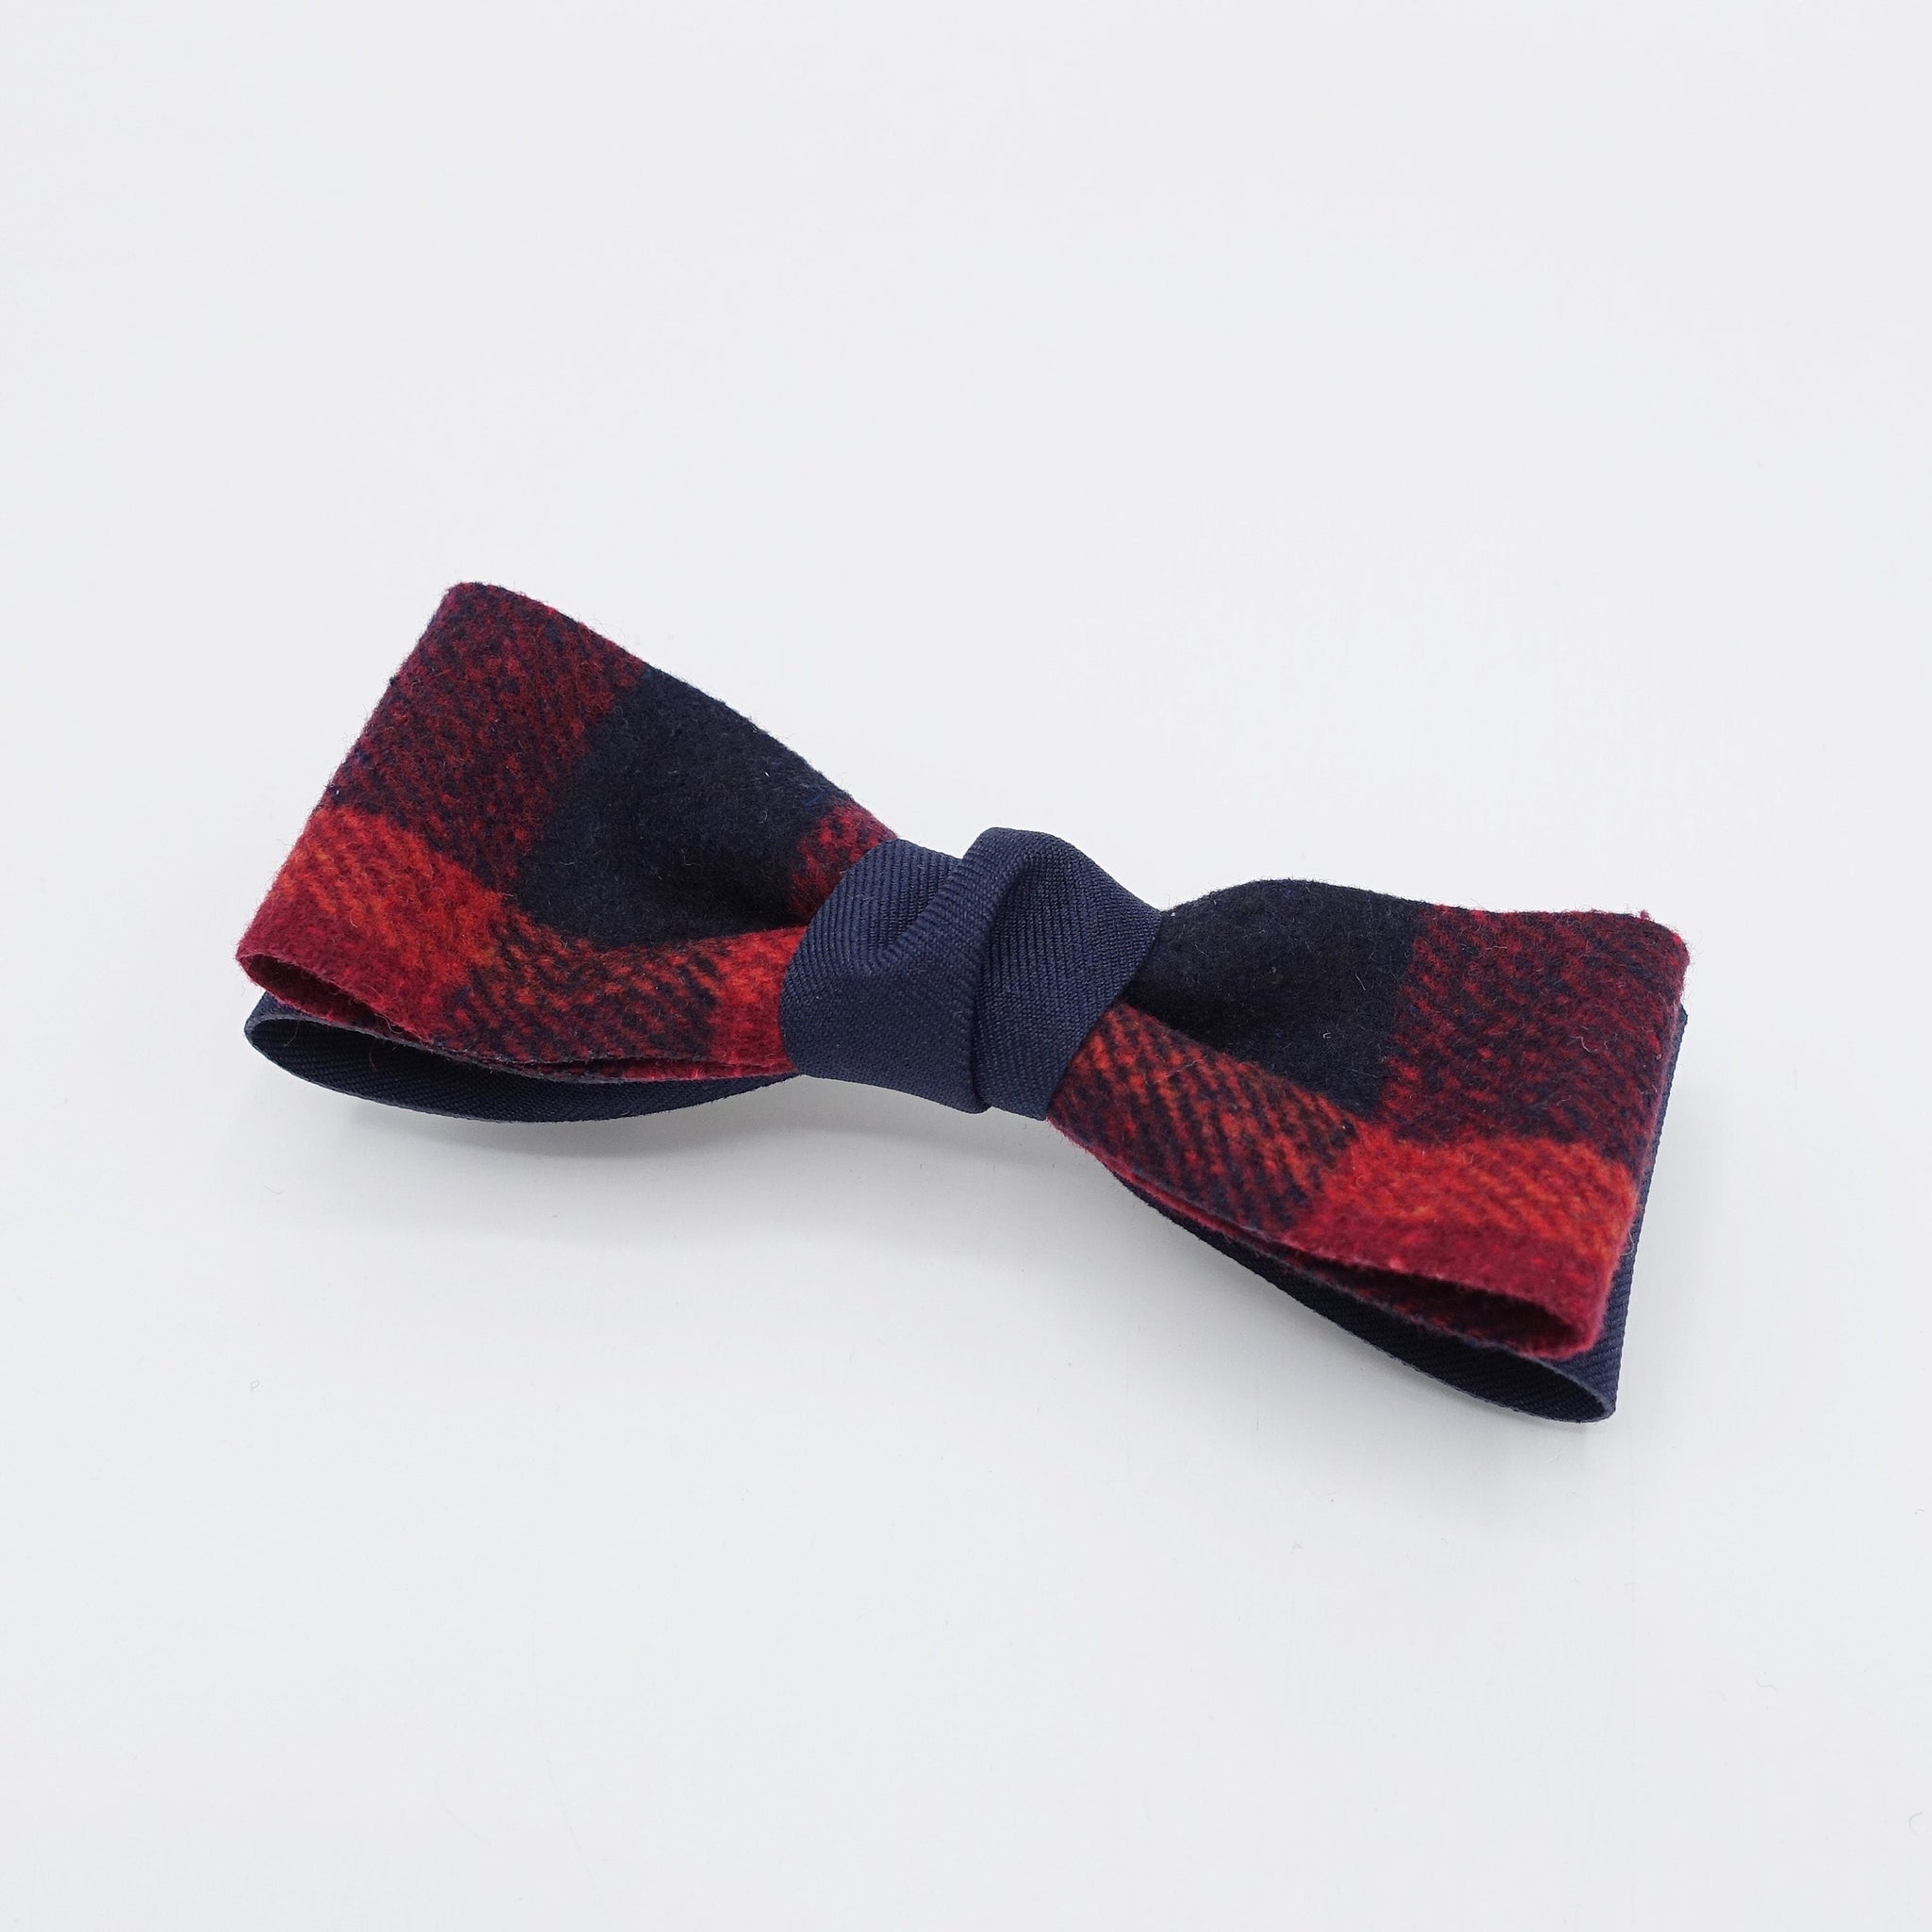 veryshine.com Barrette (Bow) Red wine woolen hair bow, plaid check bow, Fall Winter hair bow for women